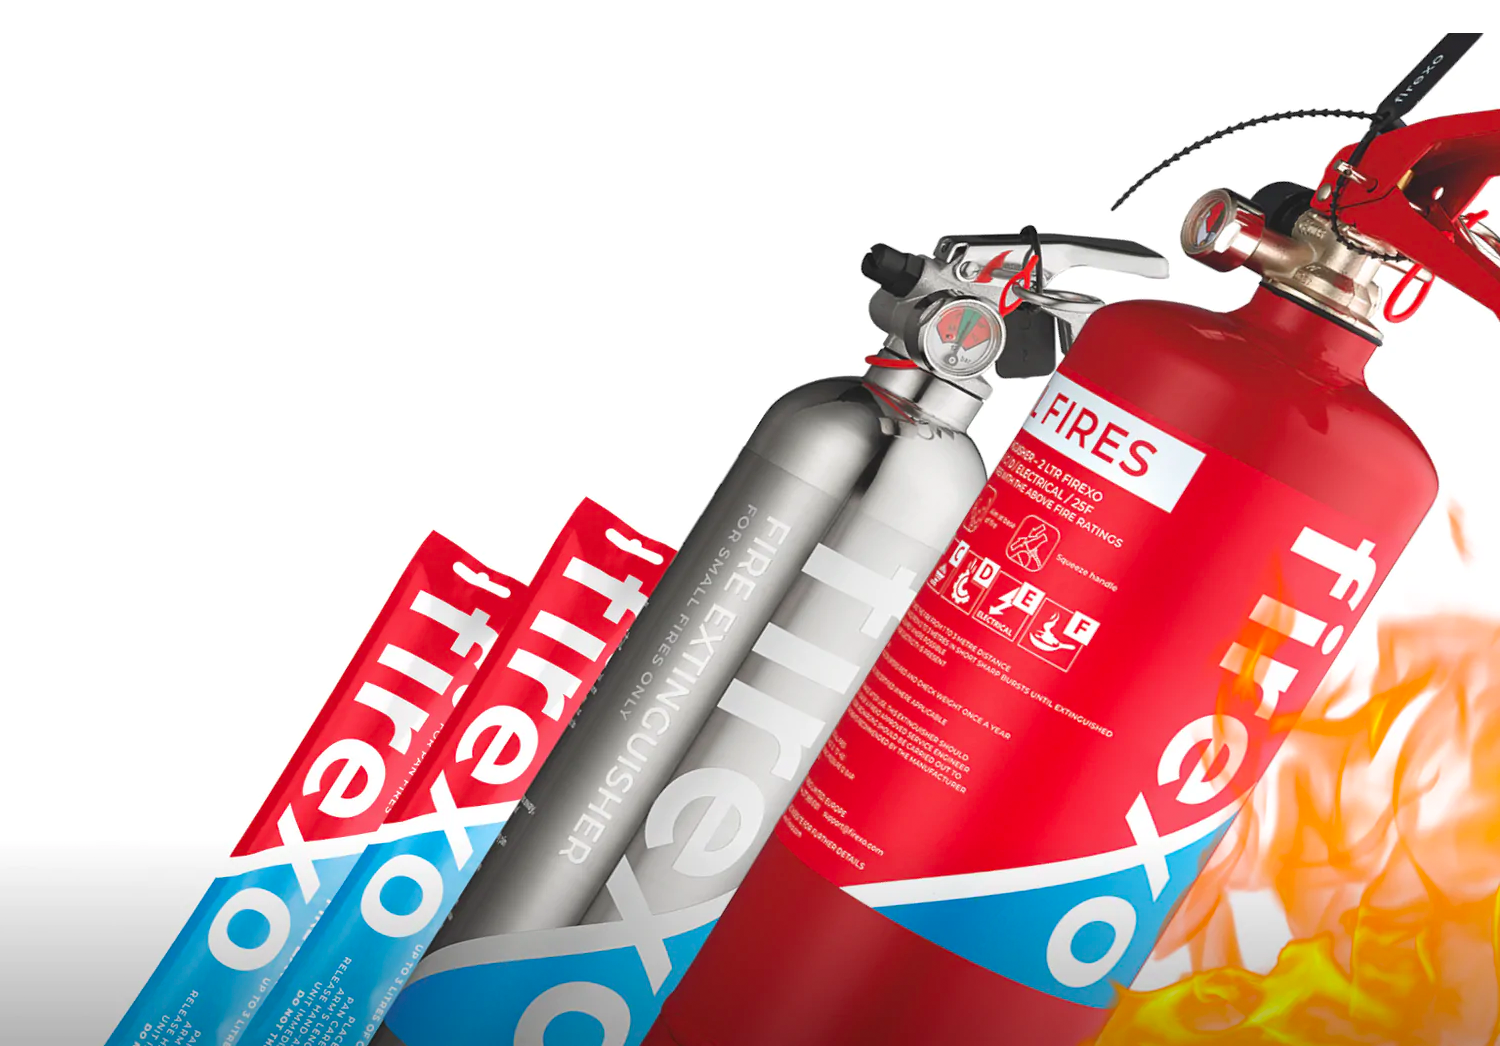 Choosing the right extinguisher